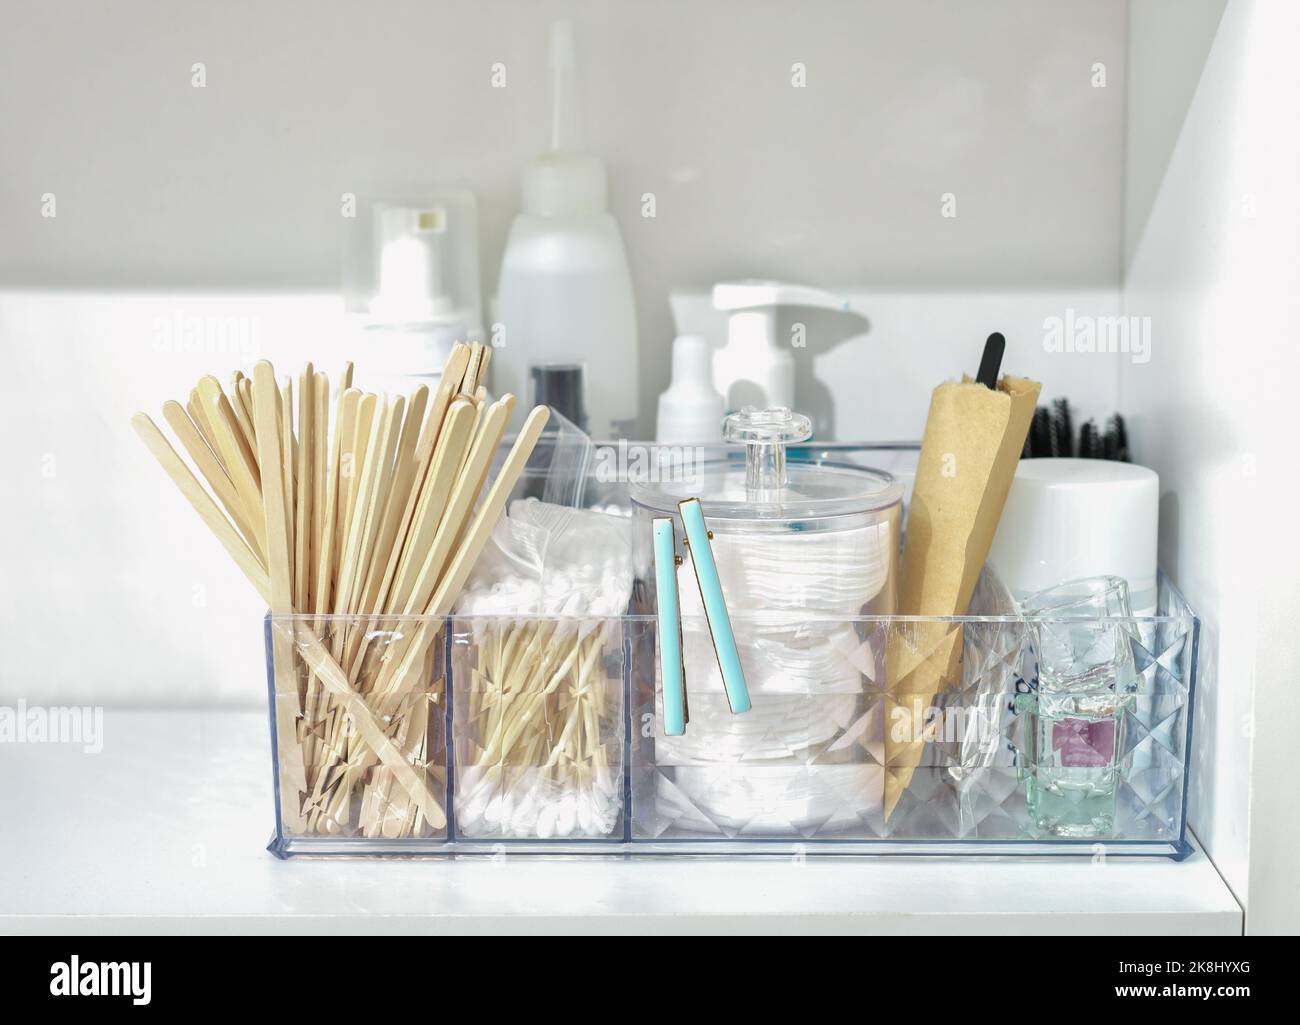 bathroom shelf with beauty care accessories, cotton swabs, disks, wooden sticks, cream bottles and lotion. face skin care and hygiene Stock Photo